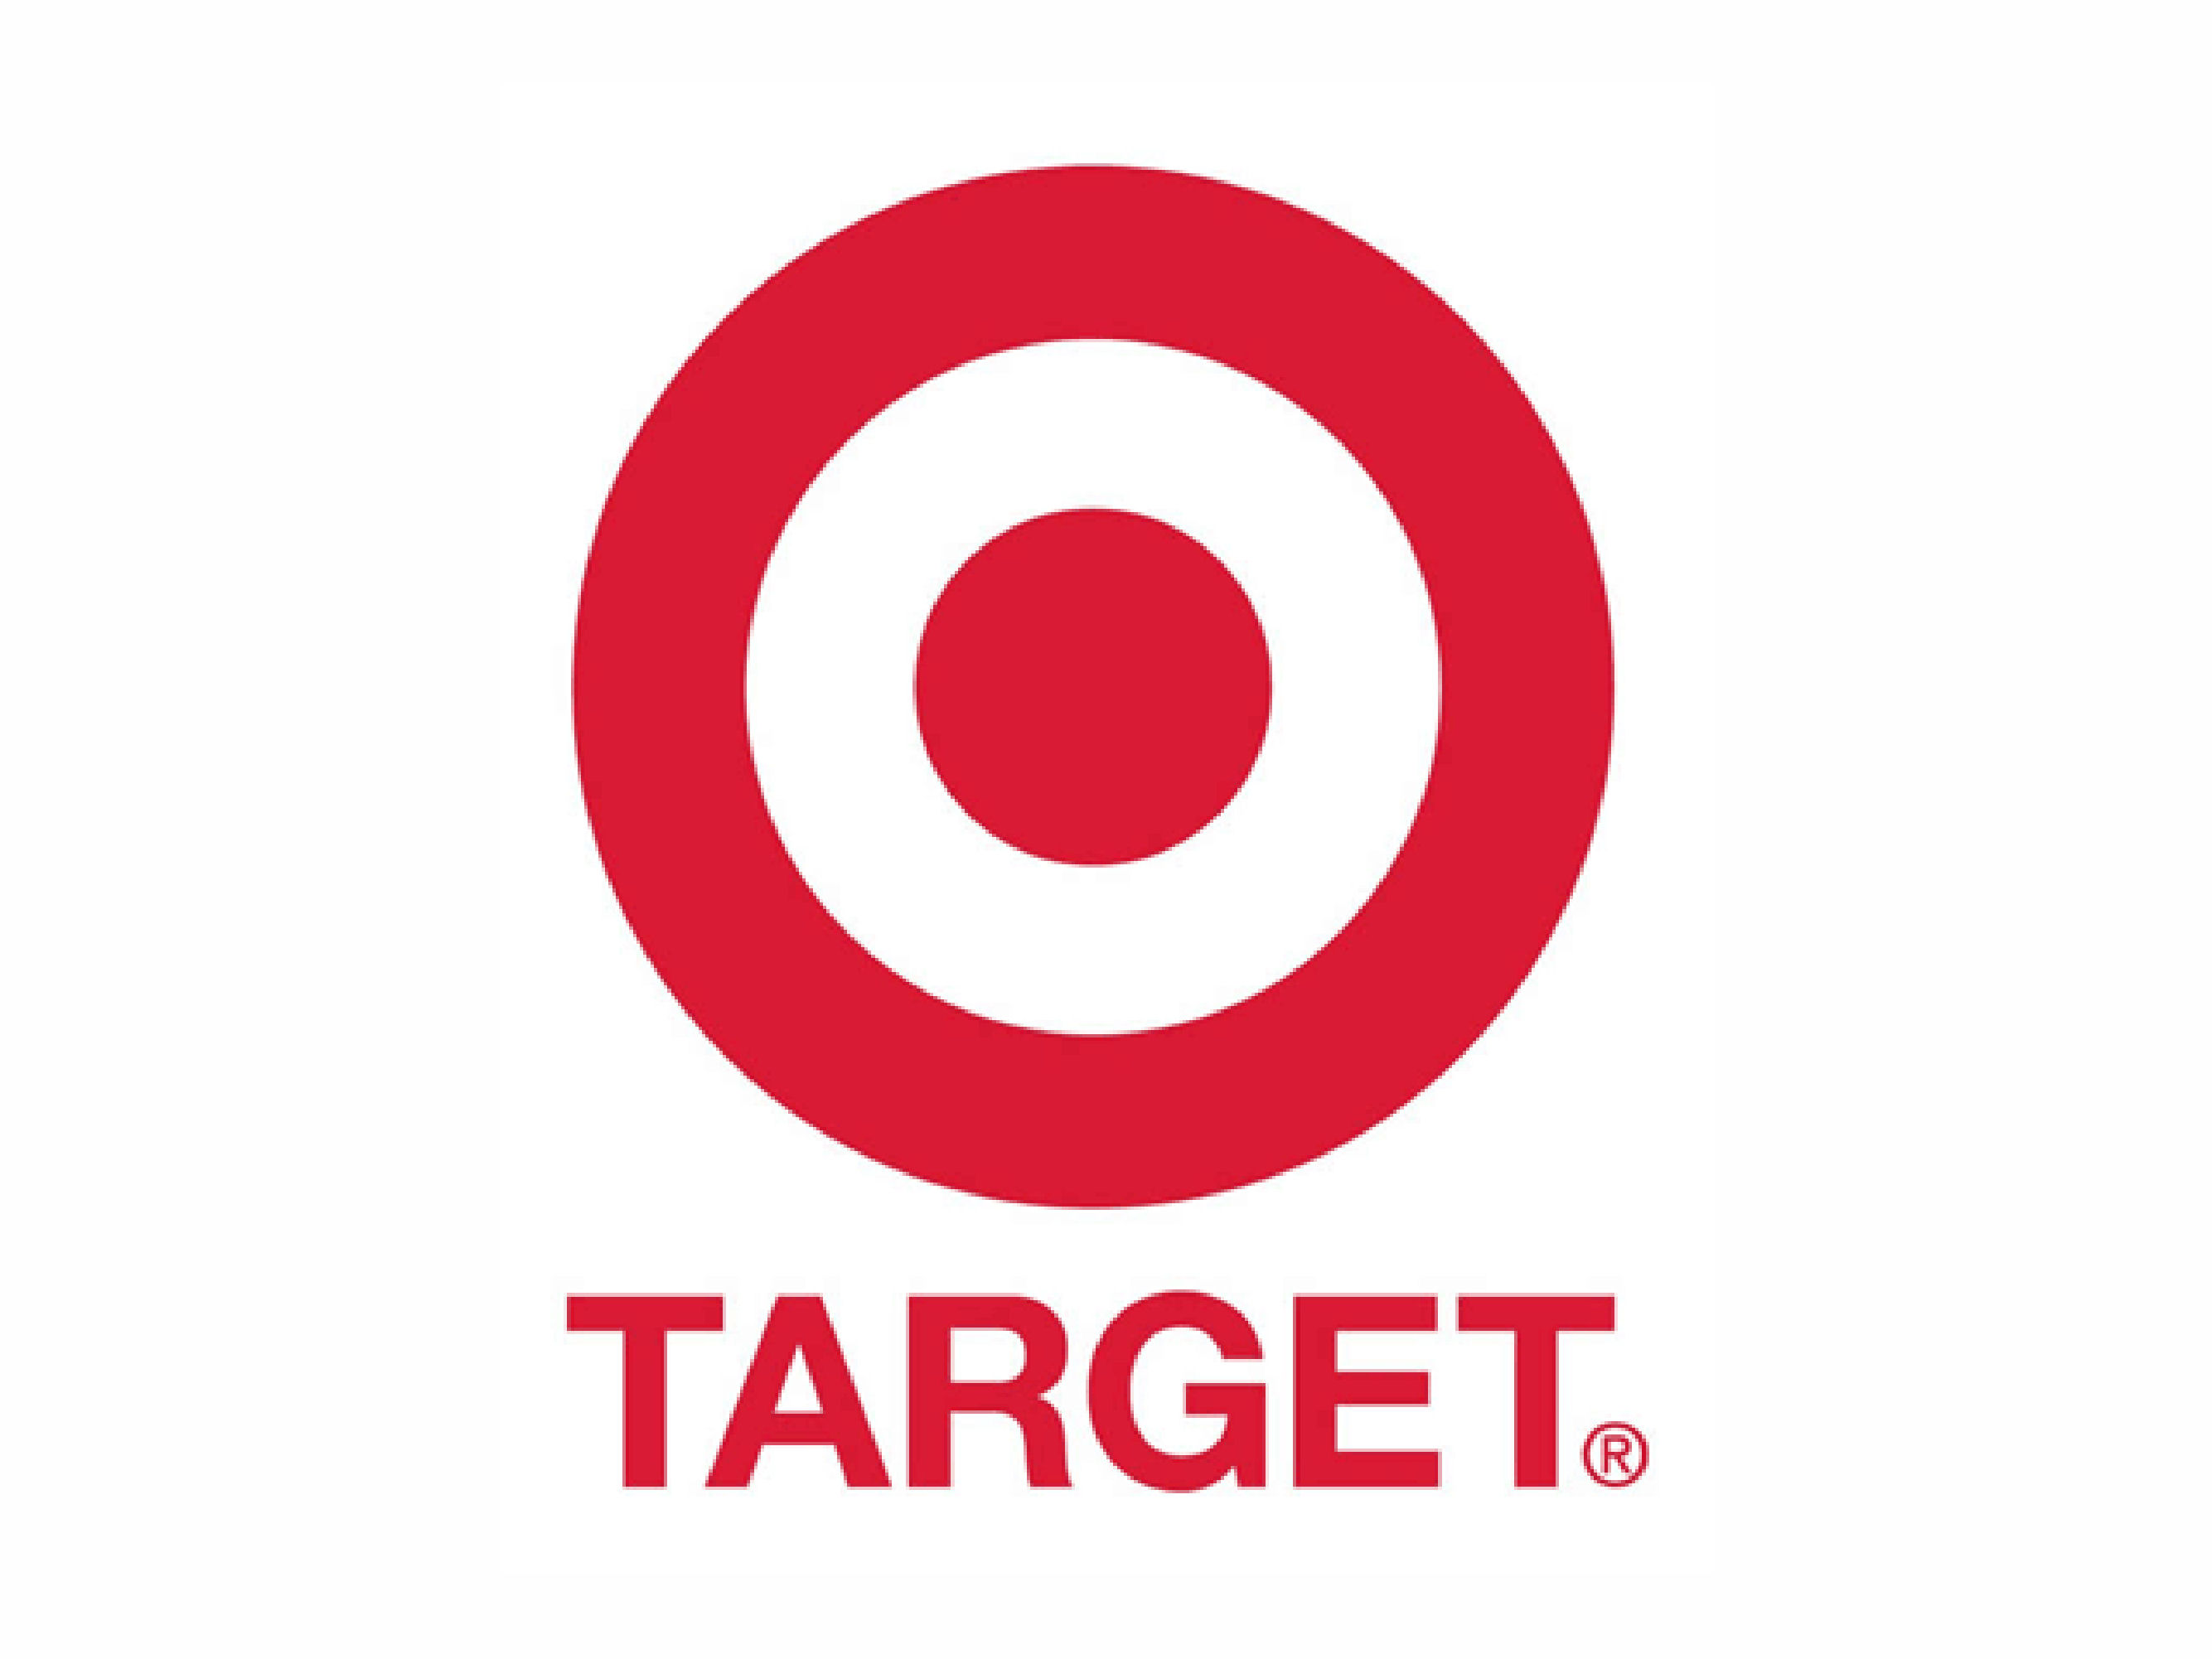 Target just got ROBBED (not really though) | WNS